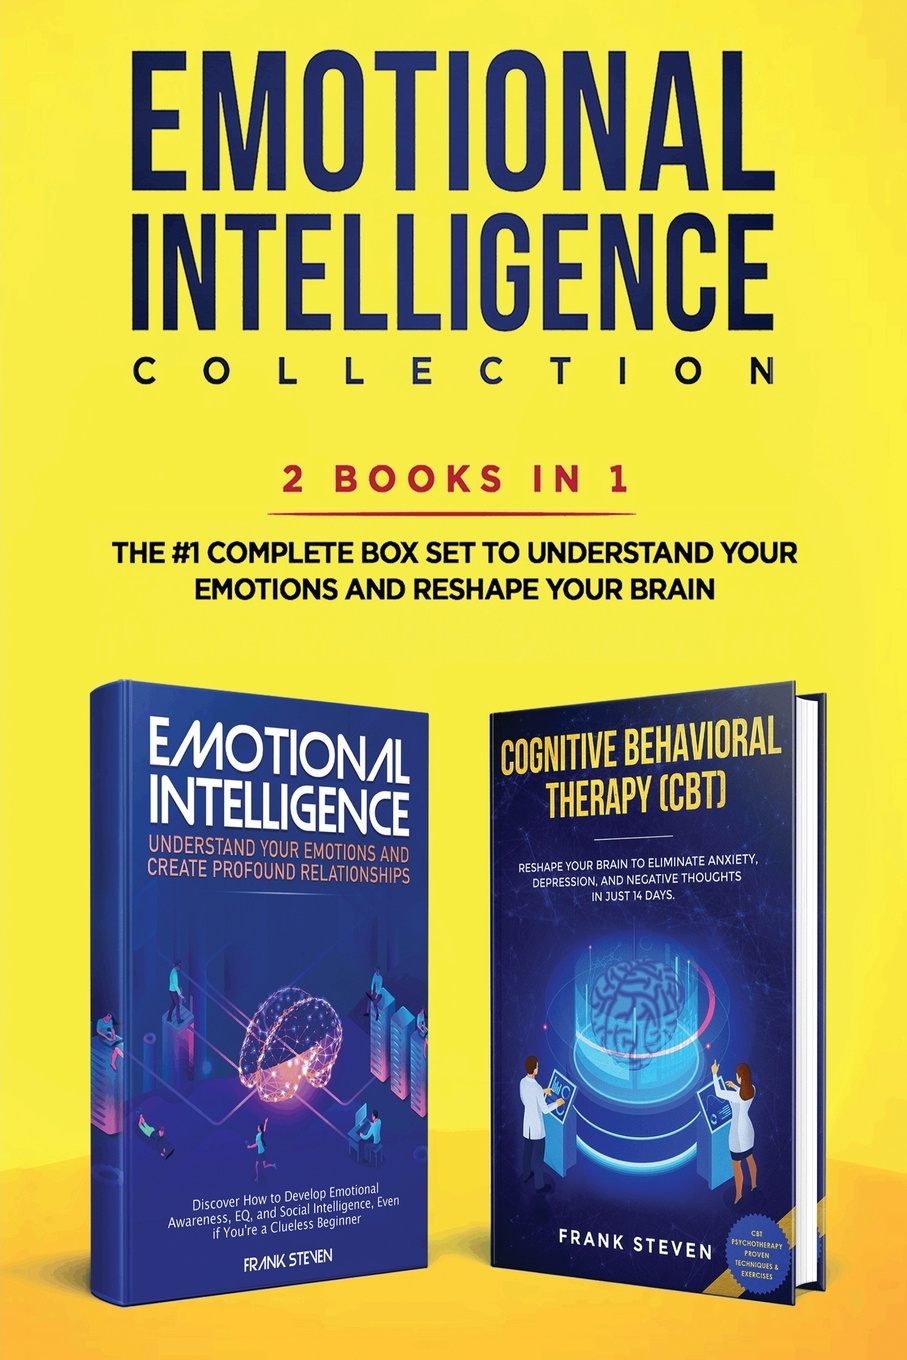 Emotional Intelligence Collection 2-in-1 Bundle. Emotional Intelligence + Cognitive Behavioral Therapy (CBT) - The #1 Complete Box Set to Understand Your Emotions and Reshape Your Brain